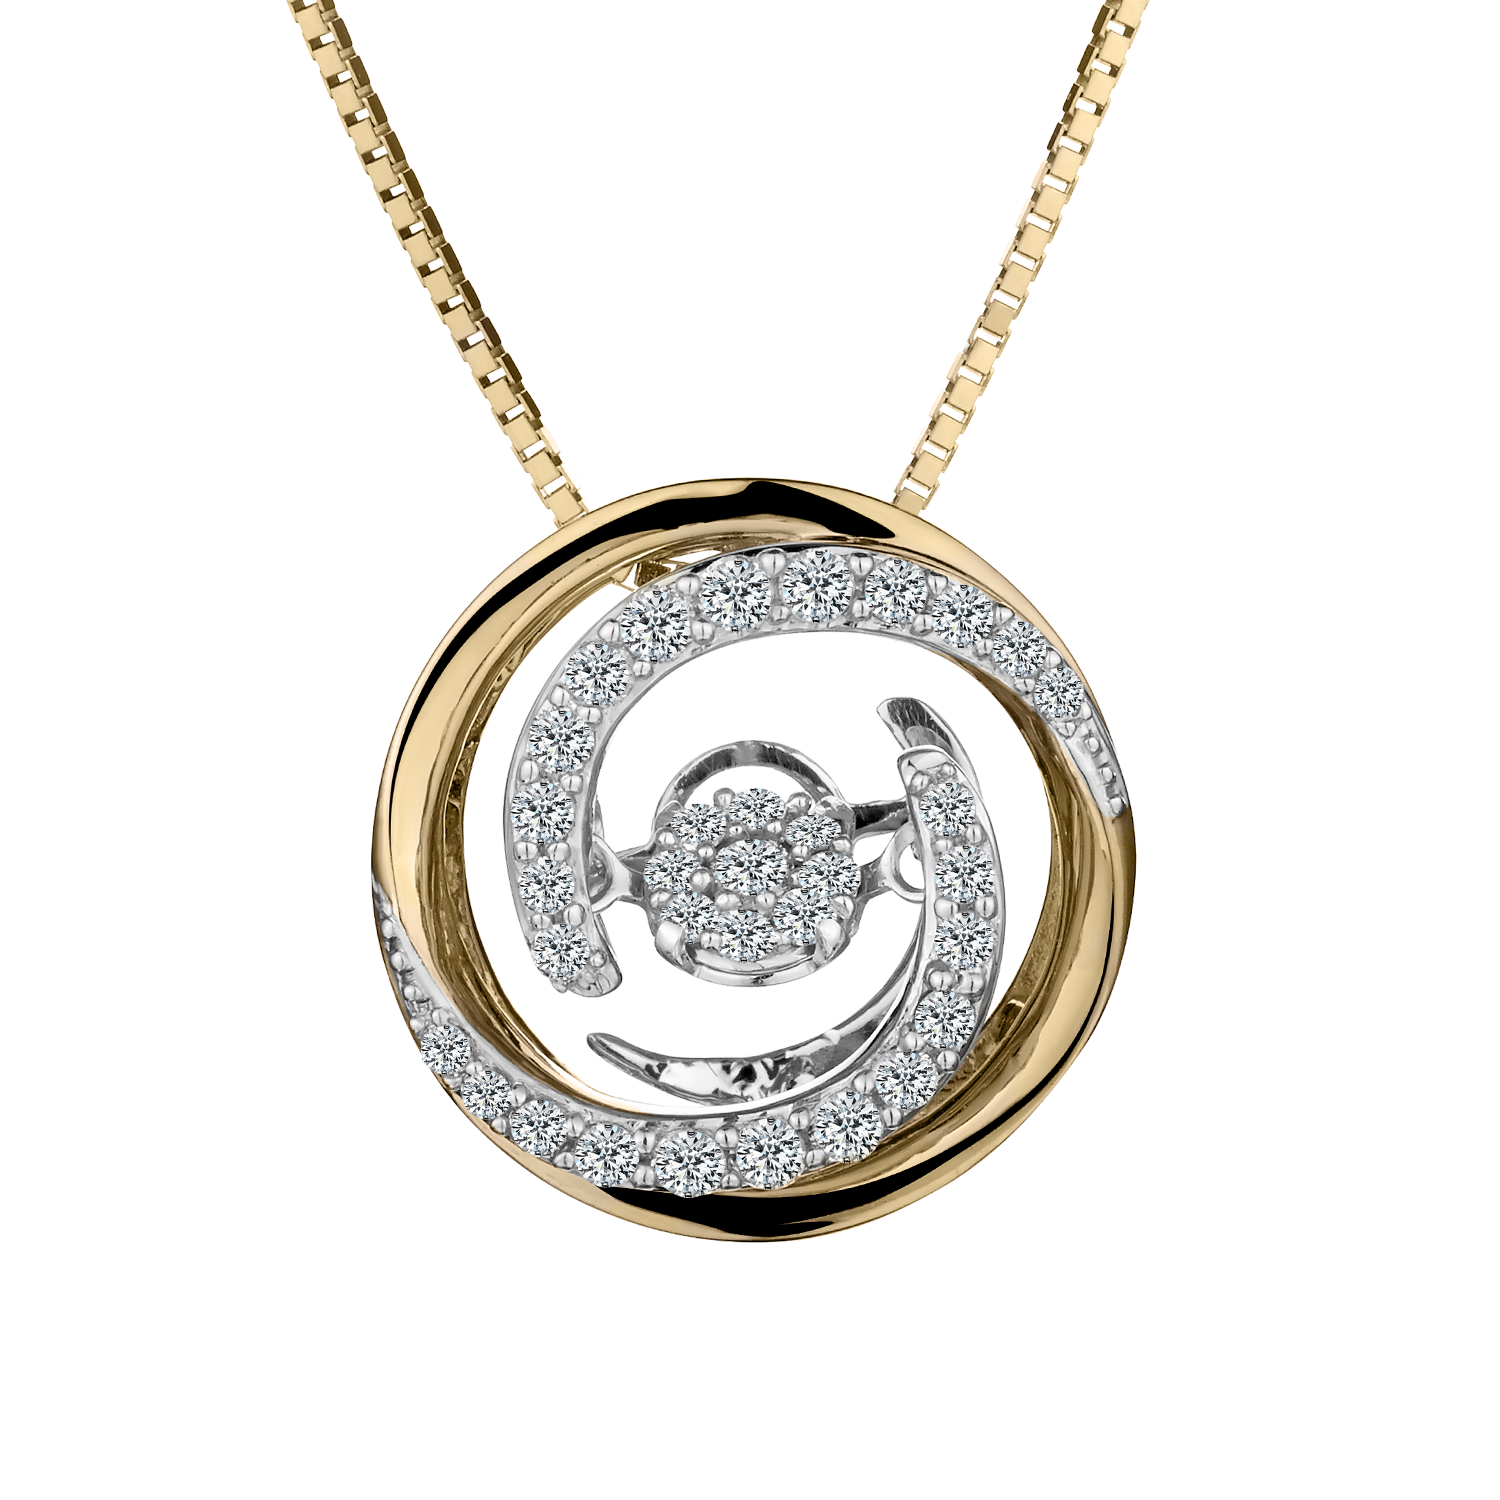 .25 Carat Diamond "Shimmer" Pendant,  10kt White and Yellow Gold (Two Tone). Necklaces and Pendants. Griffin Jewellery Designs.